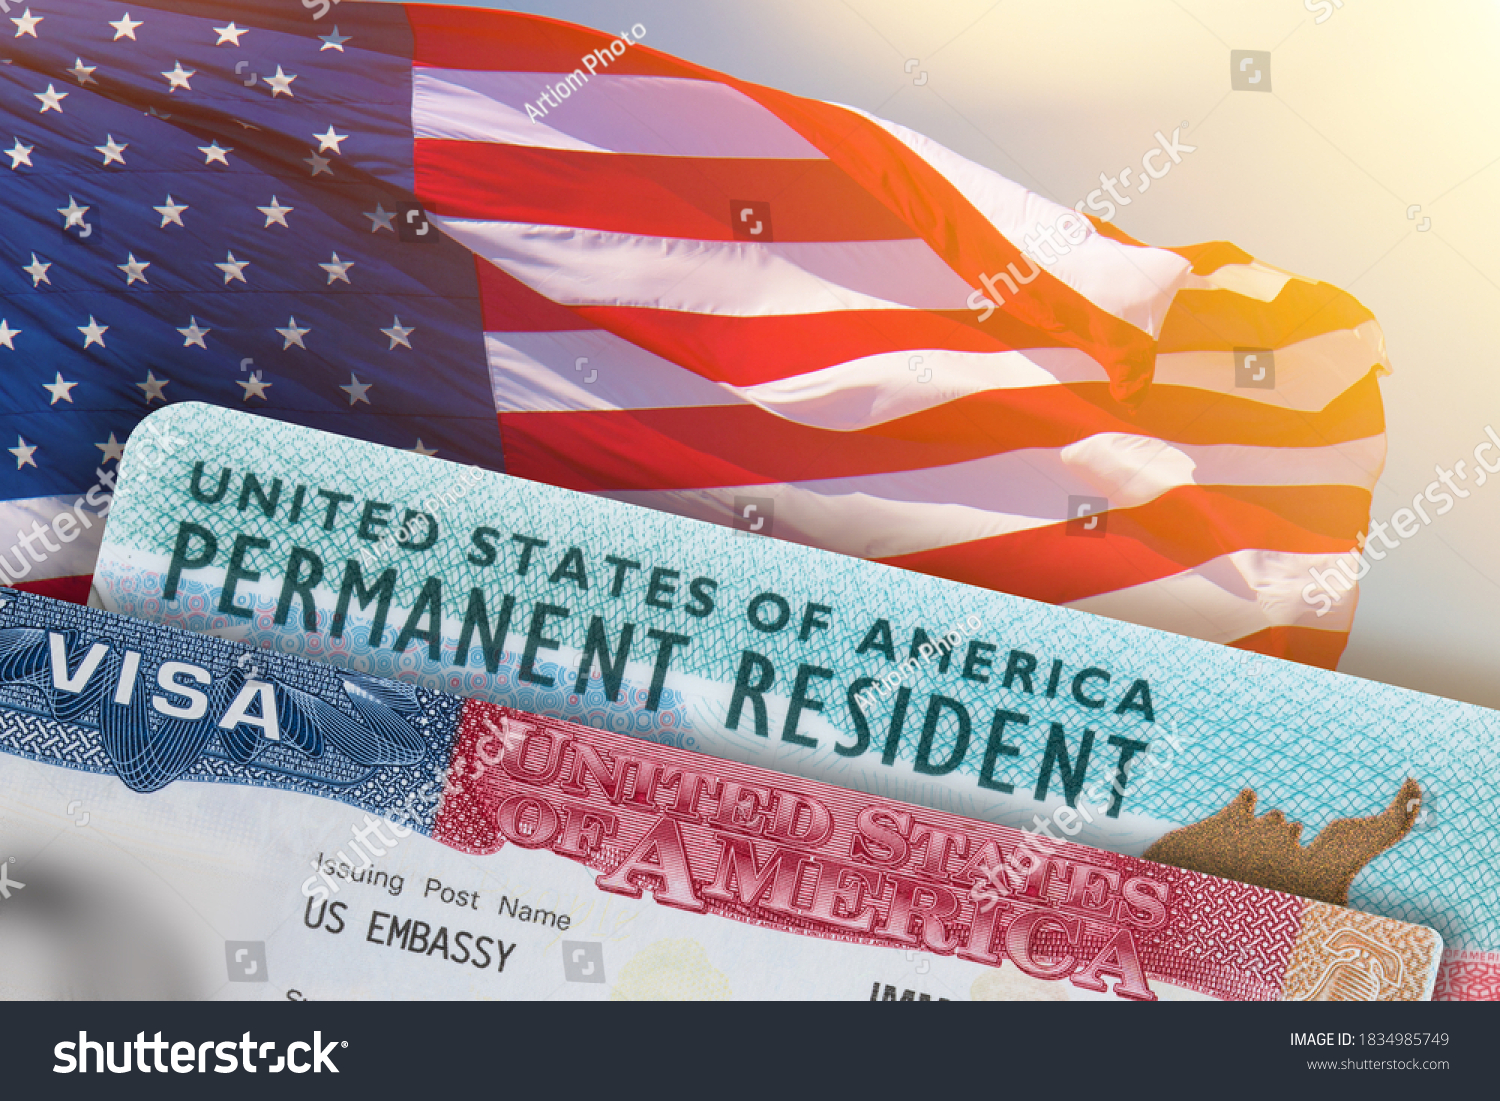 VISA United States of America. Green Card US Permanent resident. Work and Travel documents. US Immigrant.  Visa for Immigration. Embassy USA. Visa in passport. #1834985749